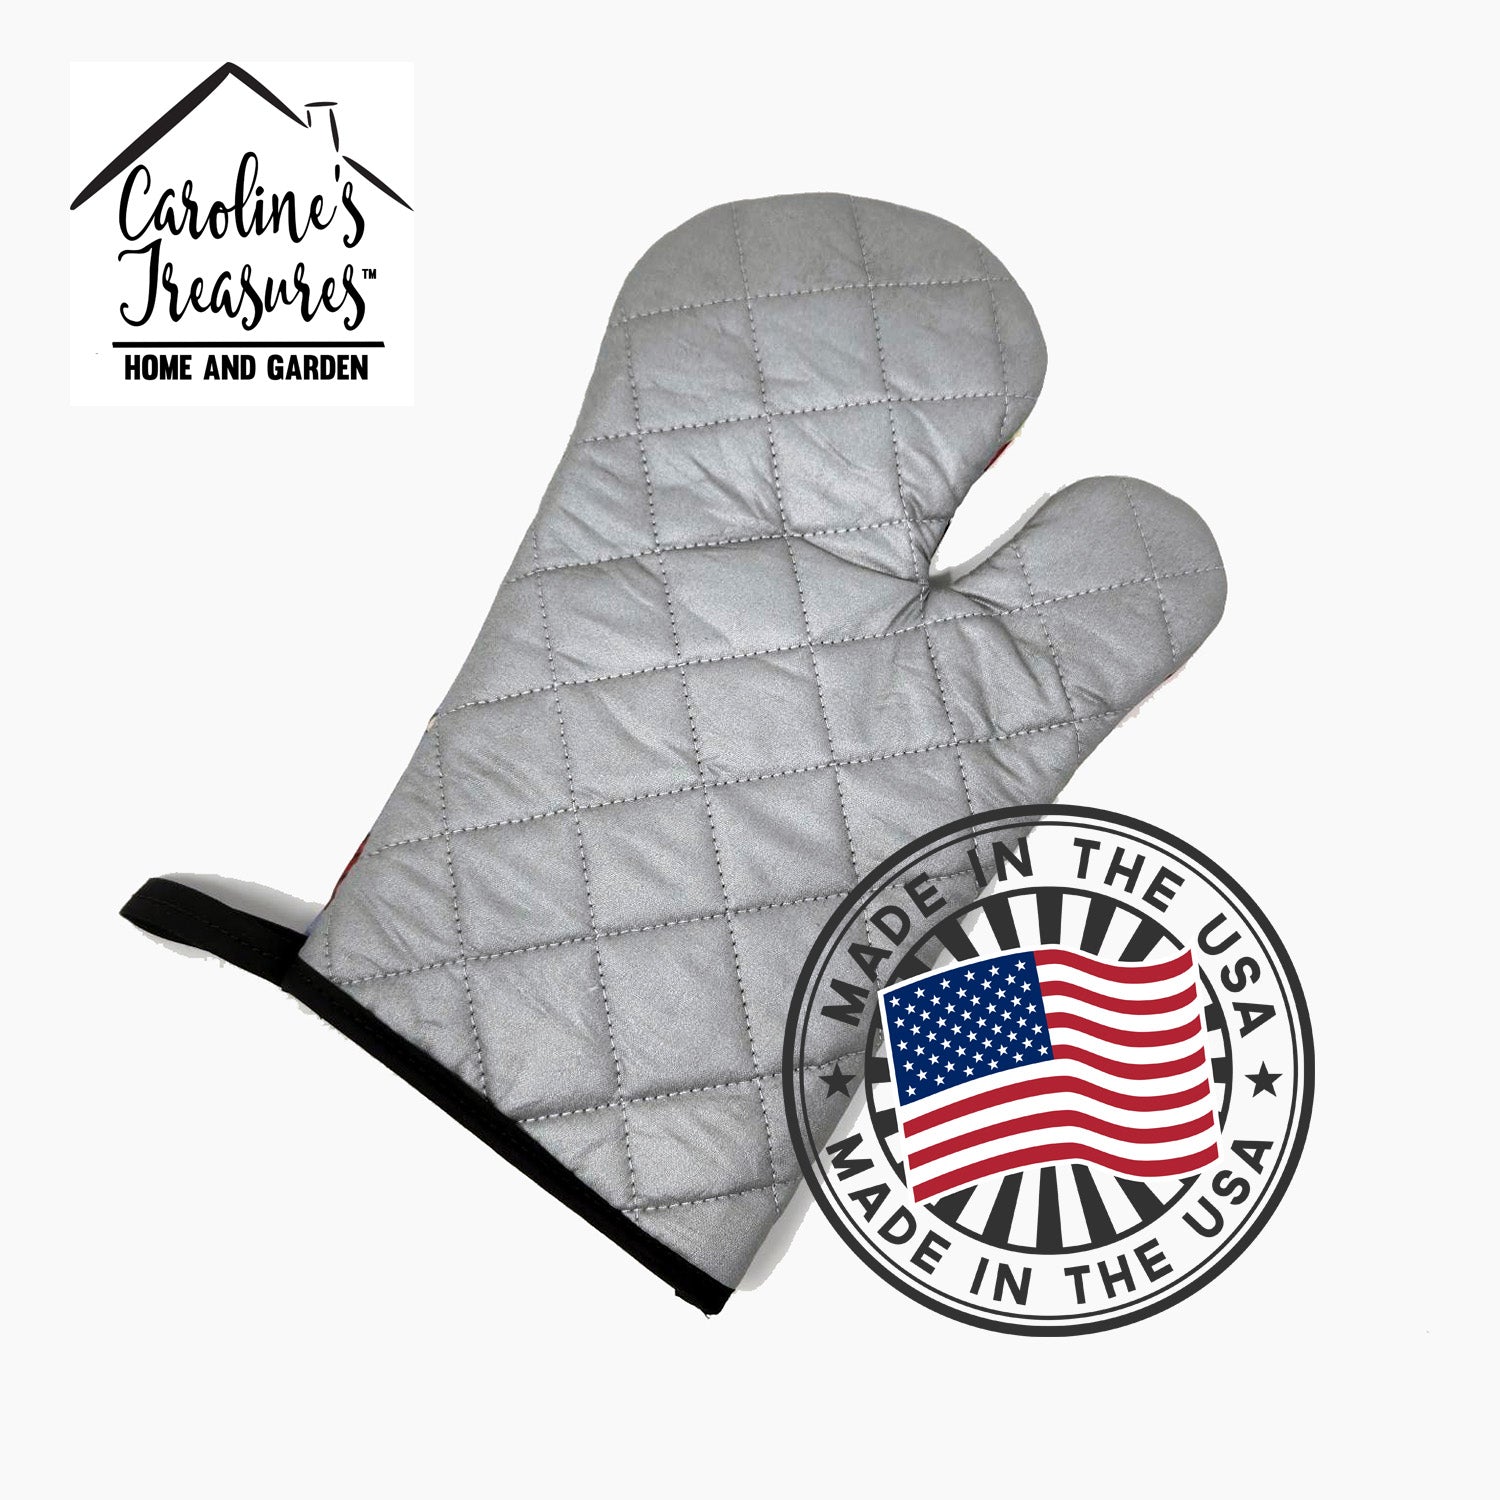 Great Dane and puppy Oven Mitt 7233OVMT